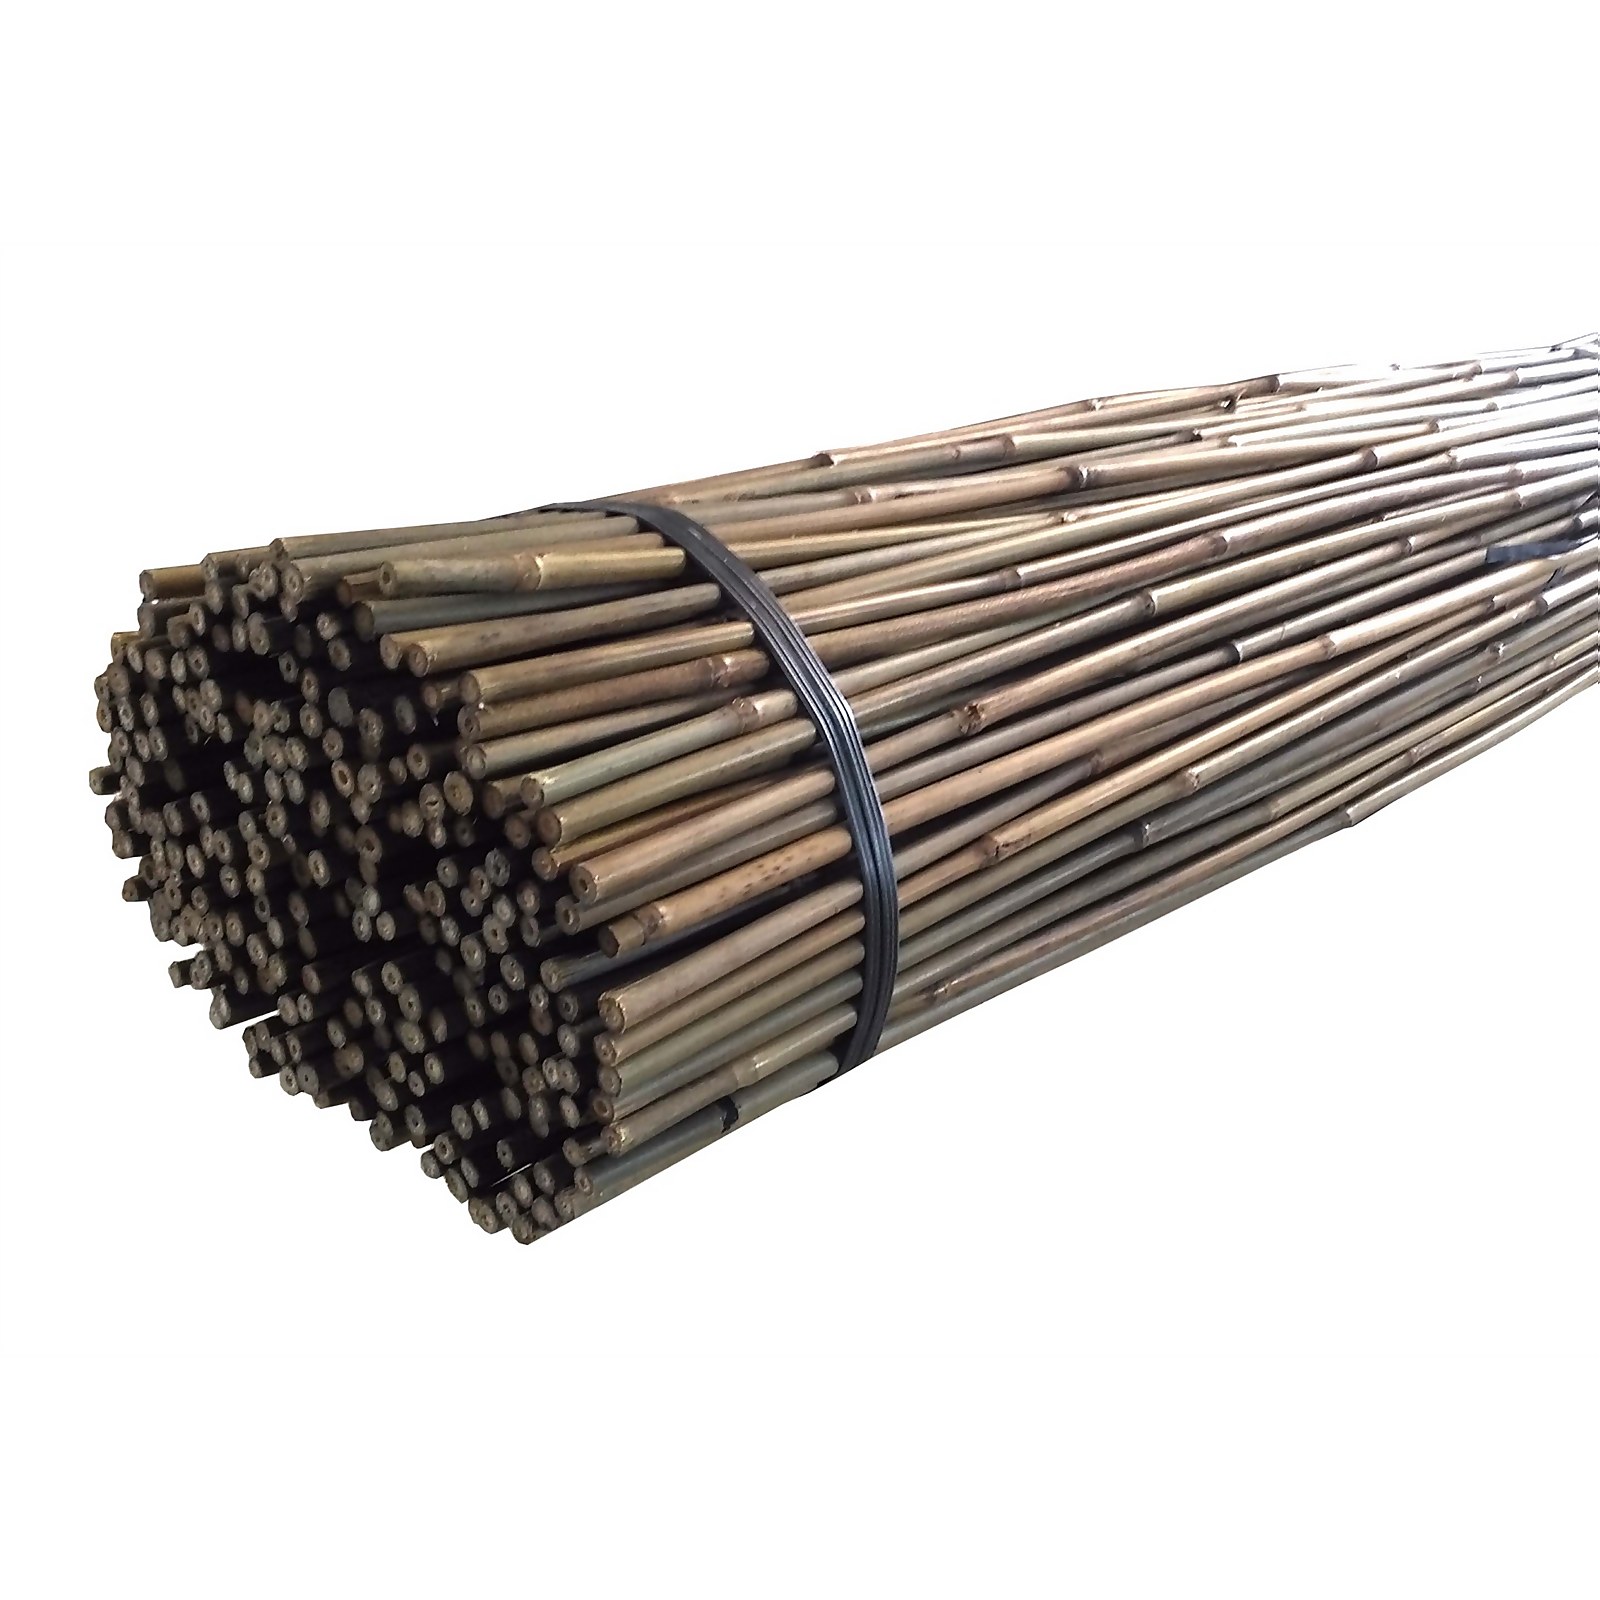 Photo of 10 Pack Bamboo Canes - 1.2m/4ft